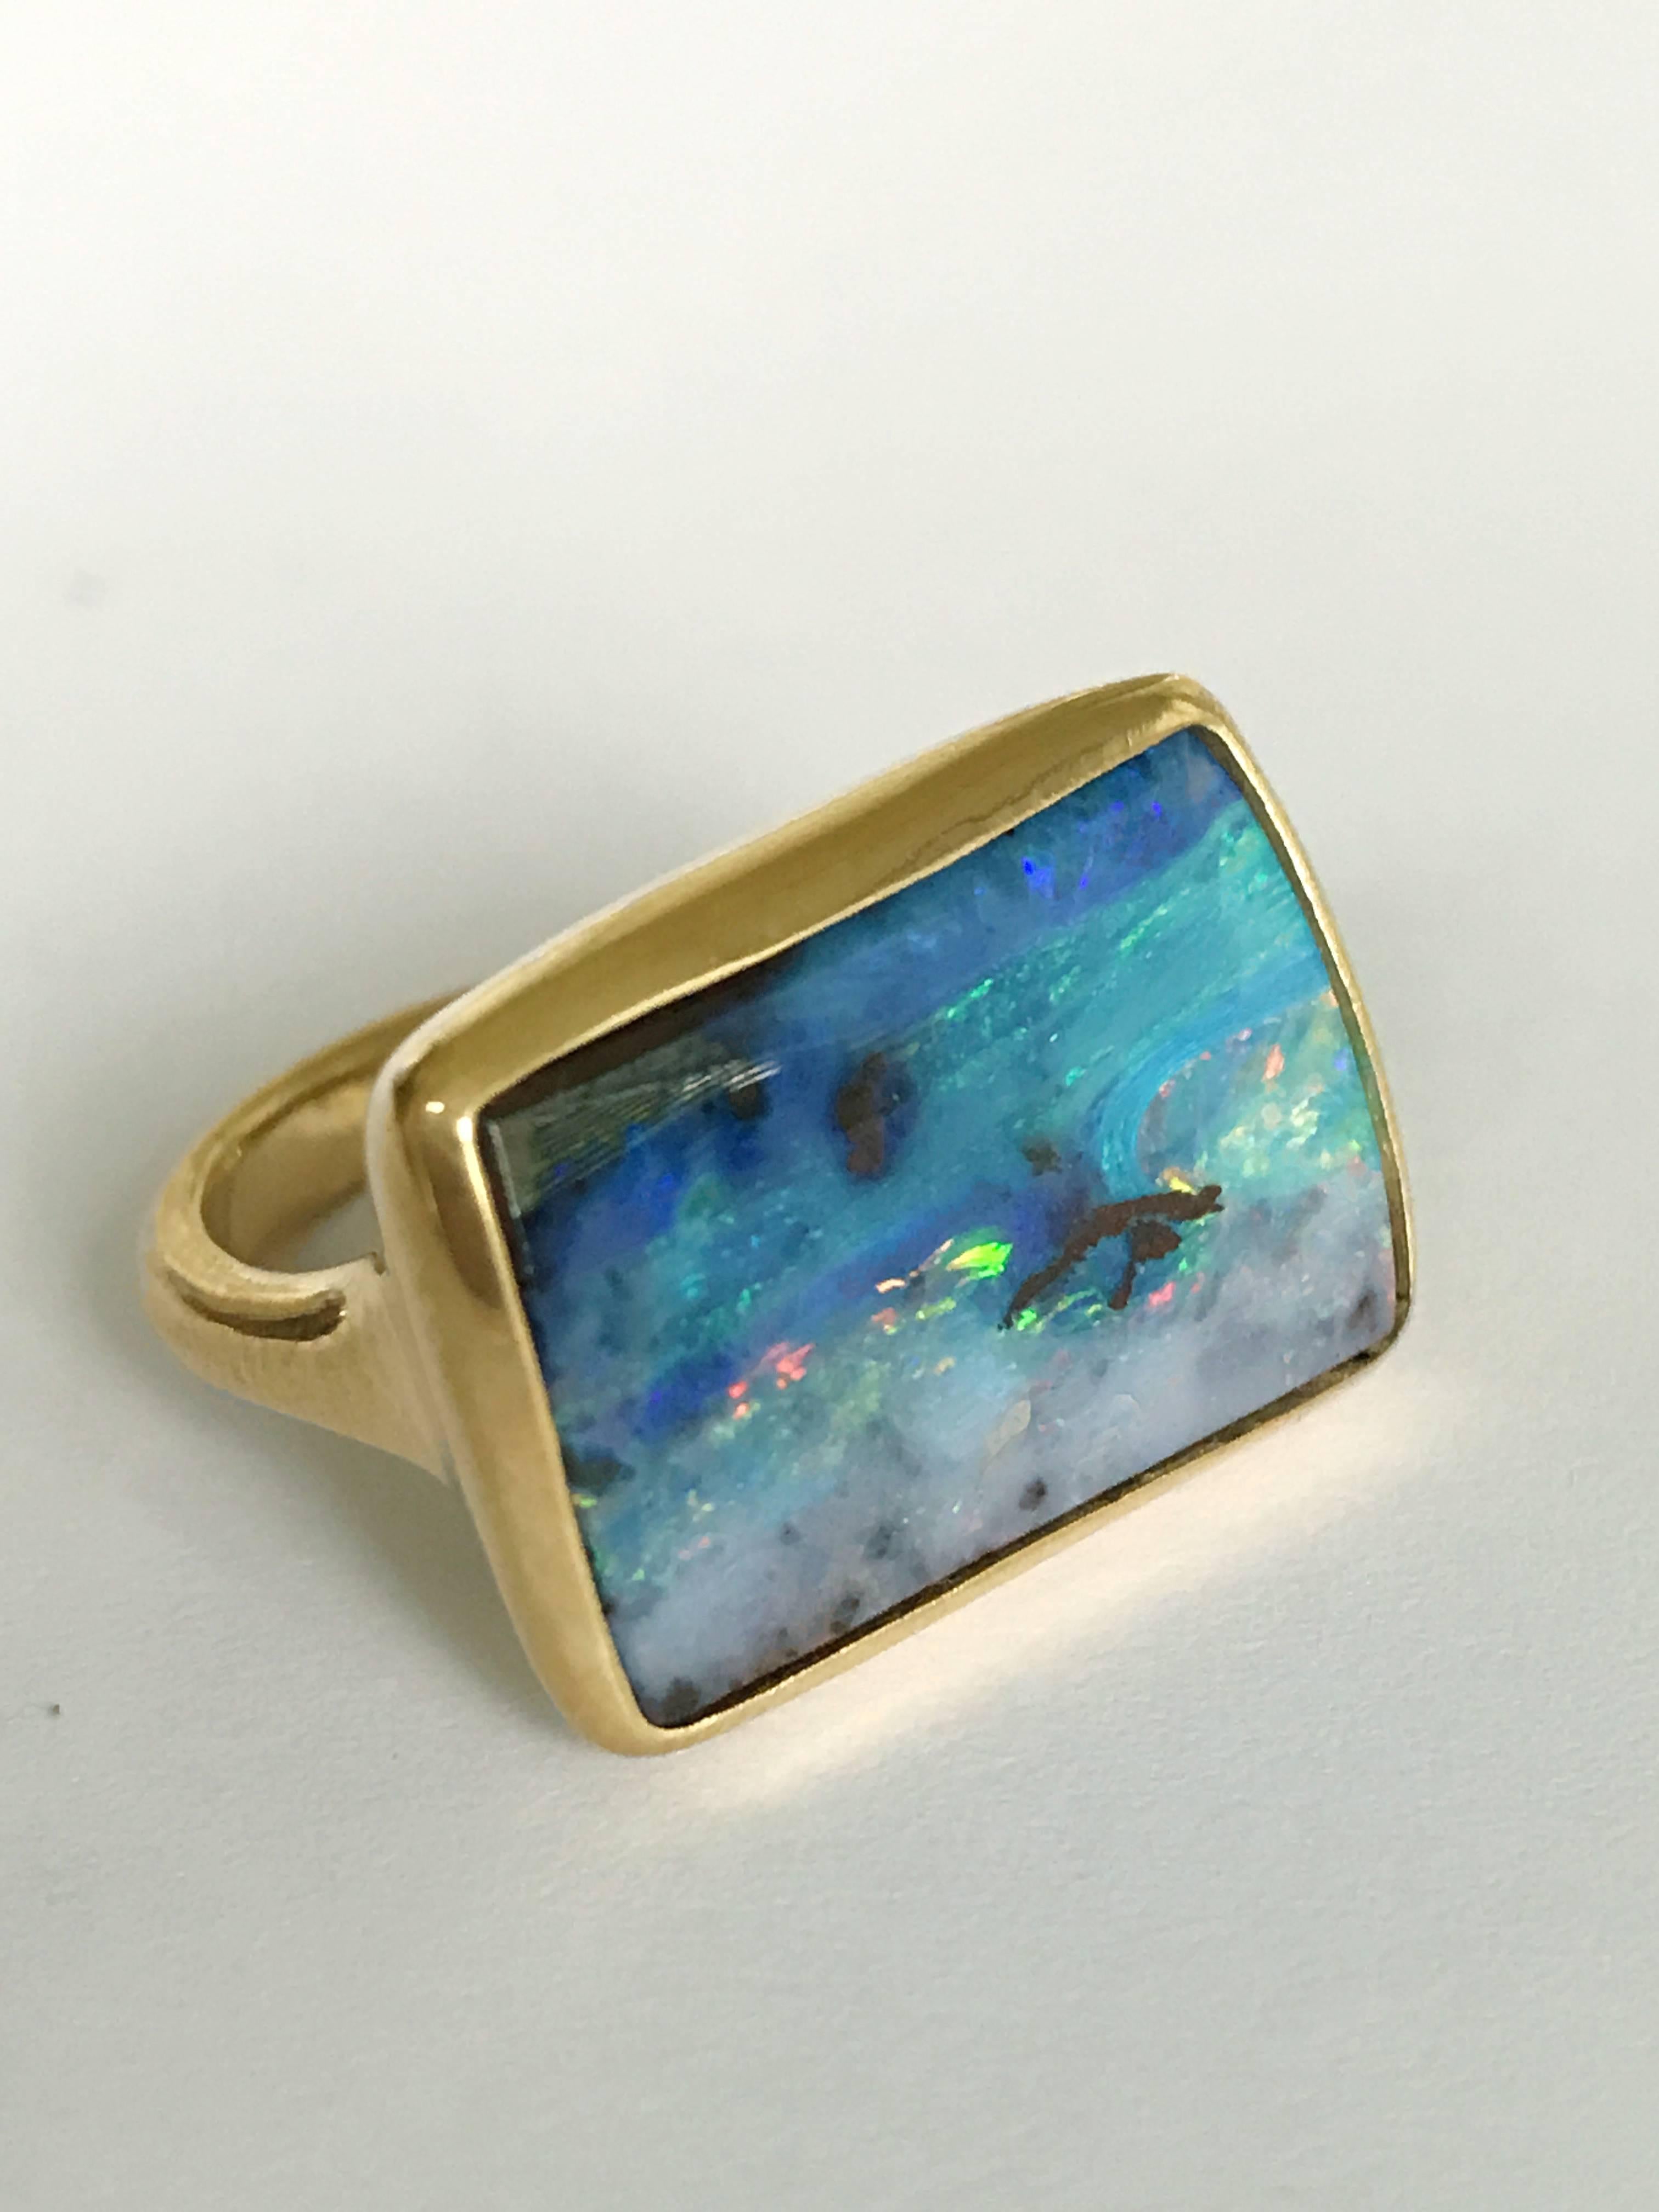 Dalben design One of a kind 18k yellow gold matte finishing ring with a 16,21 carat bezel-set wonderful Boulder Opal. 
This Australian Boulder Opal has magnificent Ocean colors 
Ring size 6 3/4 US - 54 EU re-sizable to most finger sizes. 
Bezel